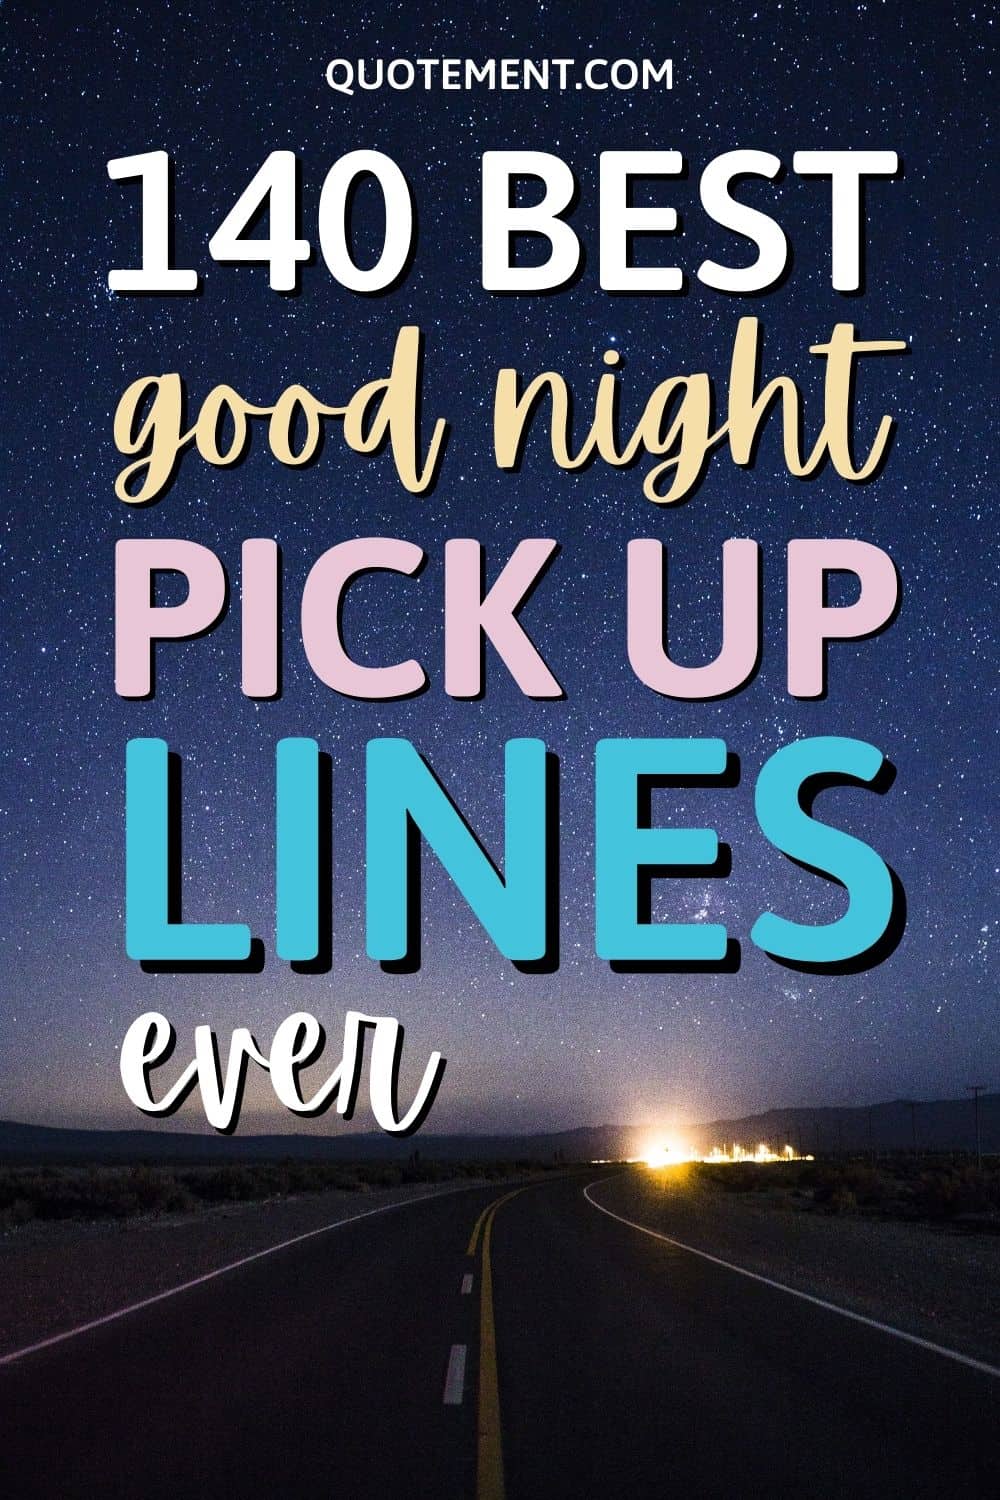 140 Cool Good Night Pick Up Lines To Impress Your Crush